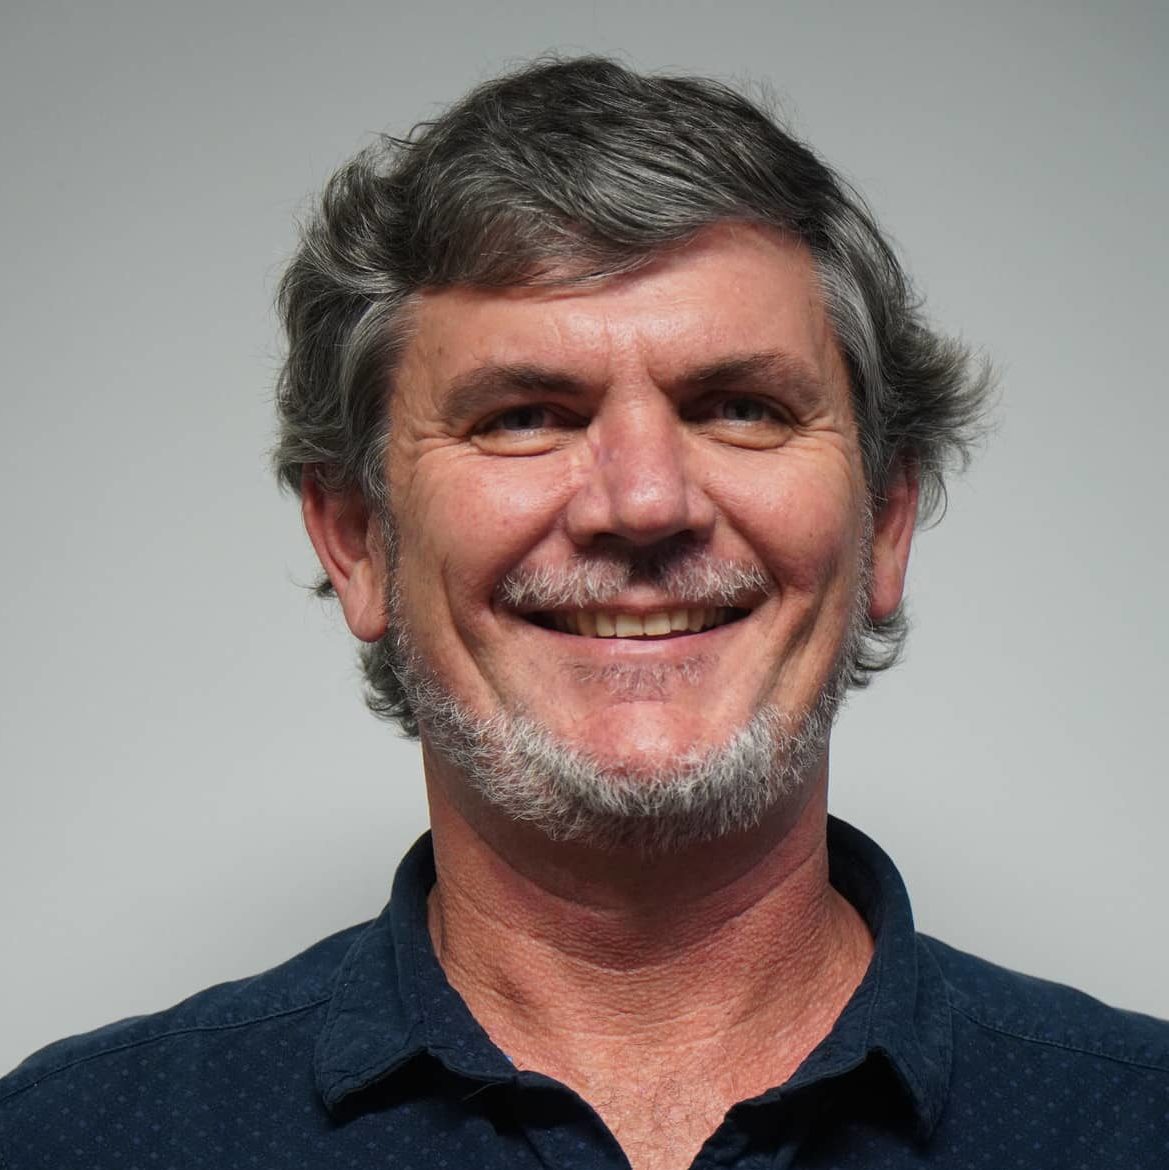 John Mansfield joined Baptist World Aid in February 2020 after having spent seven years on staff at Riverlife Baptist Church, QLD, as the District Pastor.